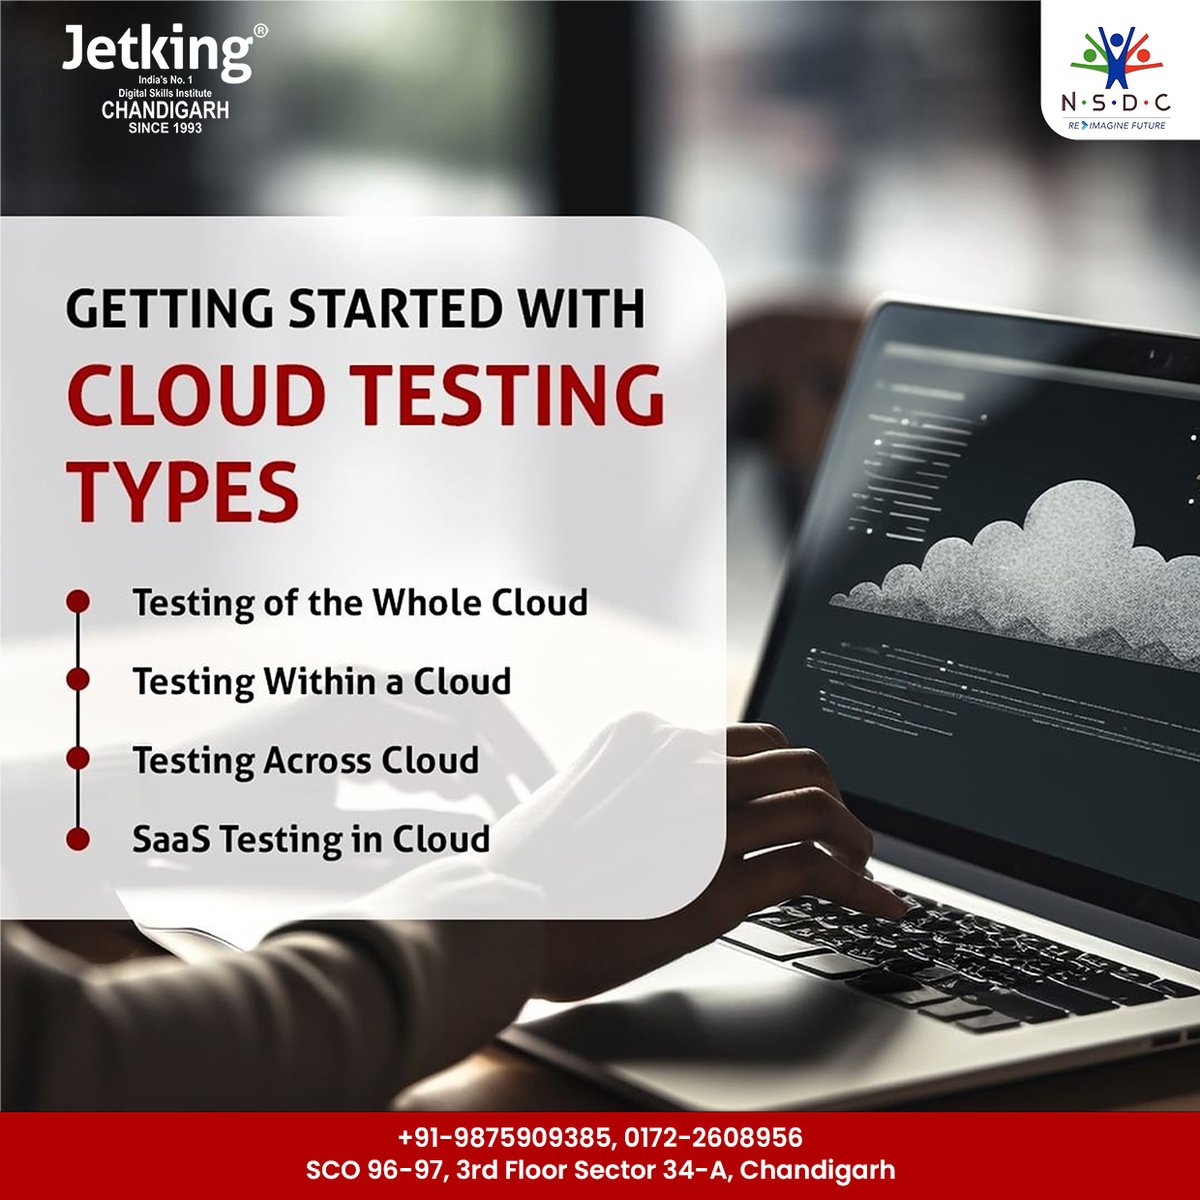 Ready to take your testing to the next level? Start optimizing your apps with #CloudTesting. Say goodbye to hardware limitations and hello to scalability and efficiency.
#JetkingChandigarh #QualityAssurance #TechJourney #Career #Opportunity #Growth #cloudcomputing #Chandigarh